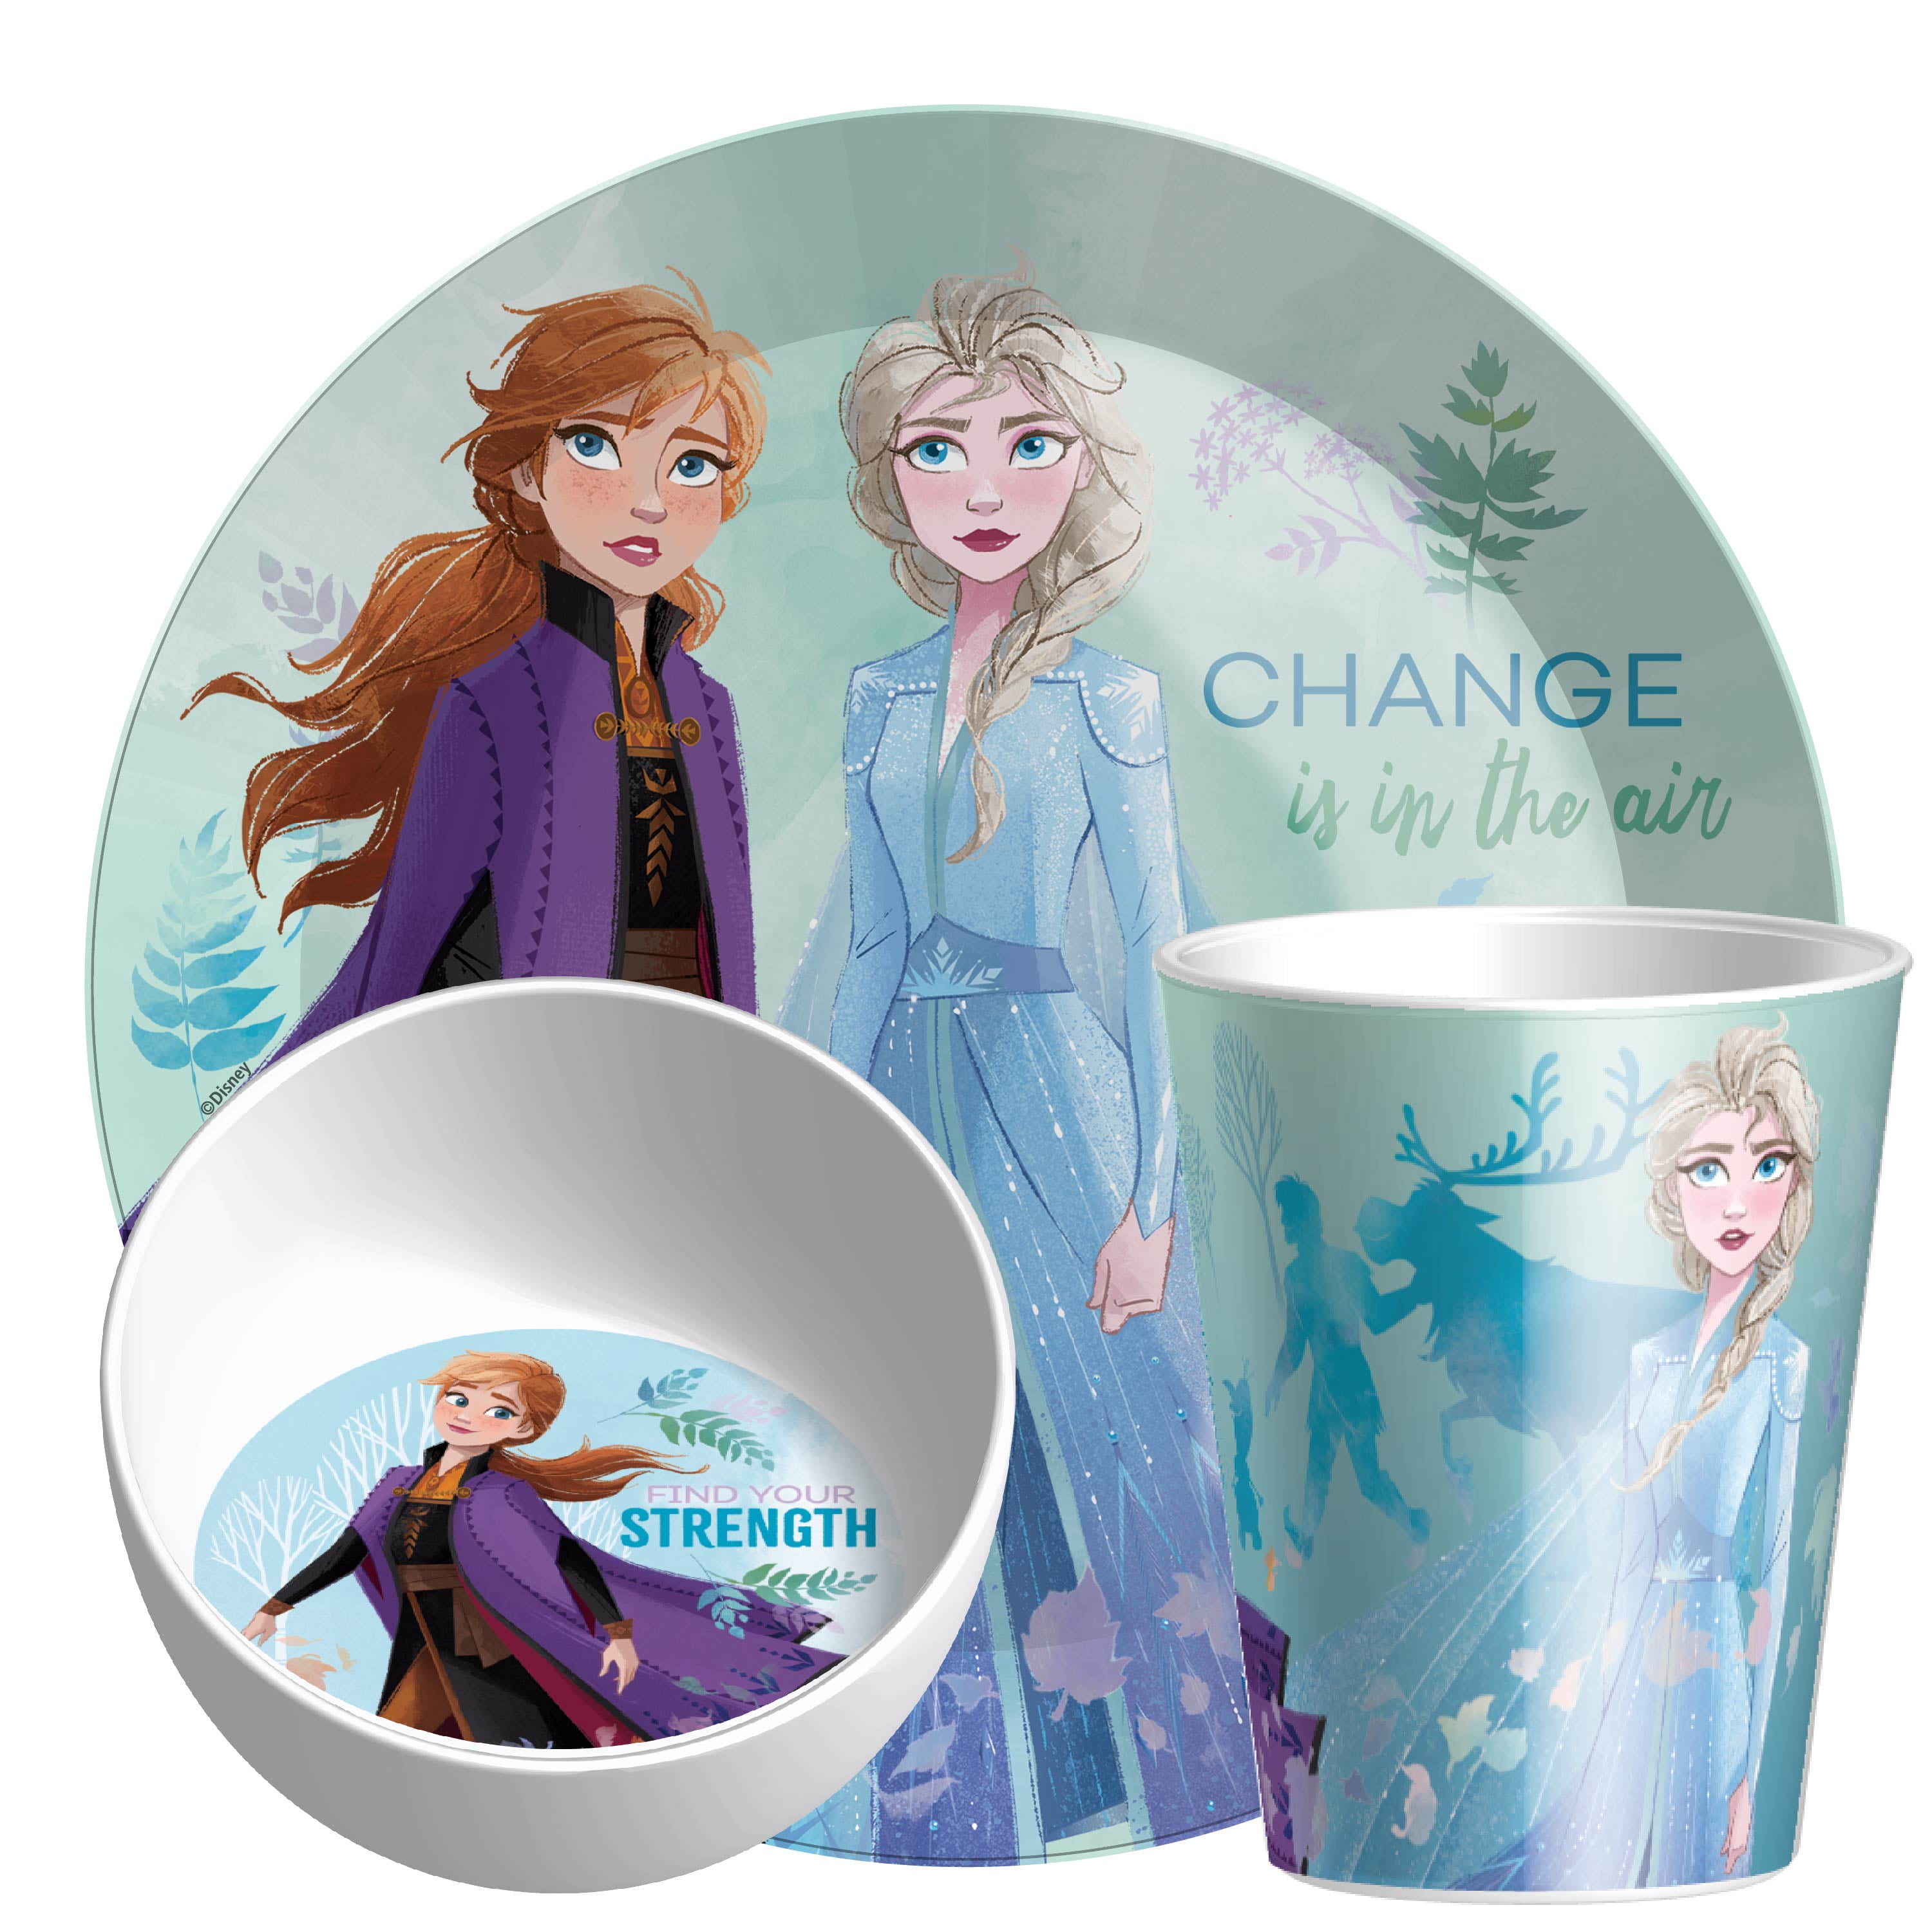 Zak Design Frozen Inspired Kids Mealtime Plastic Placemat Makes Clean Up A Breeze!